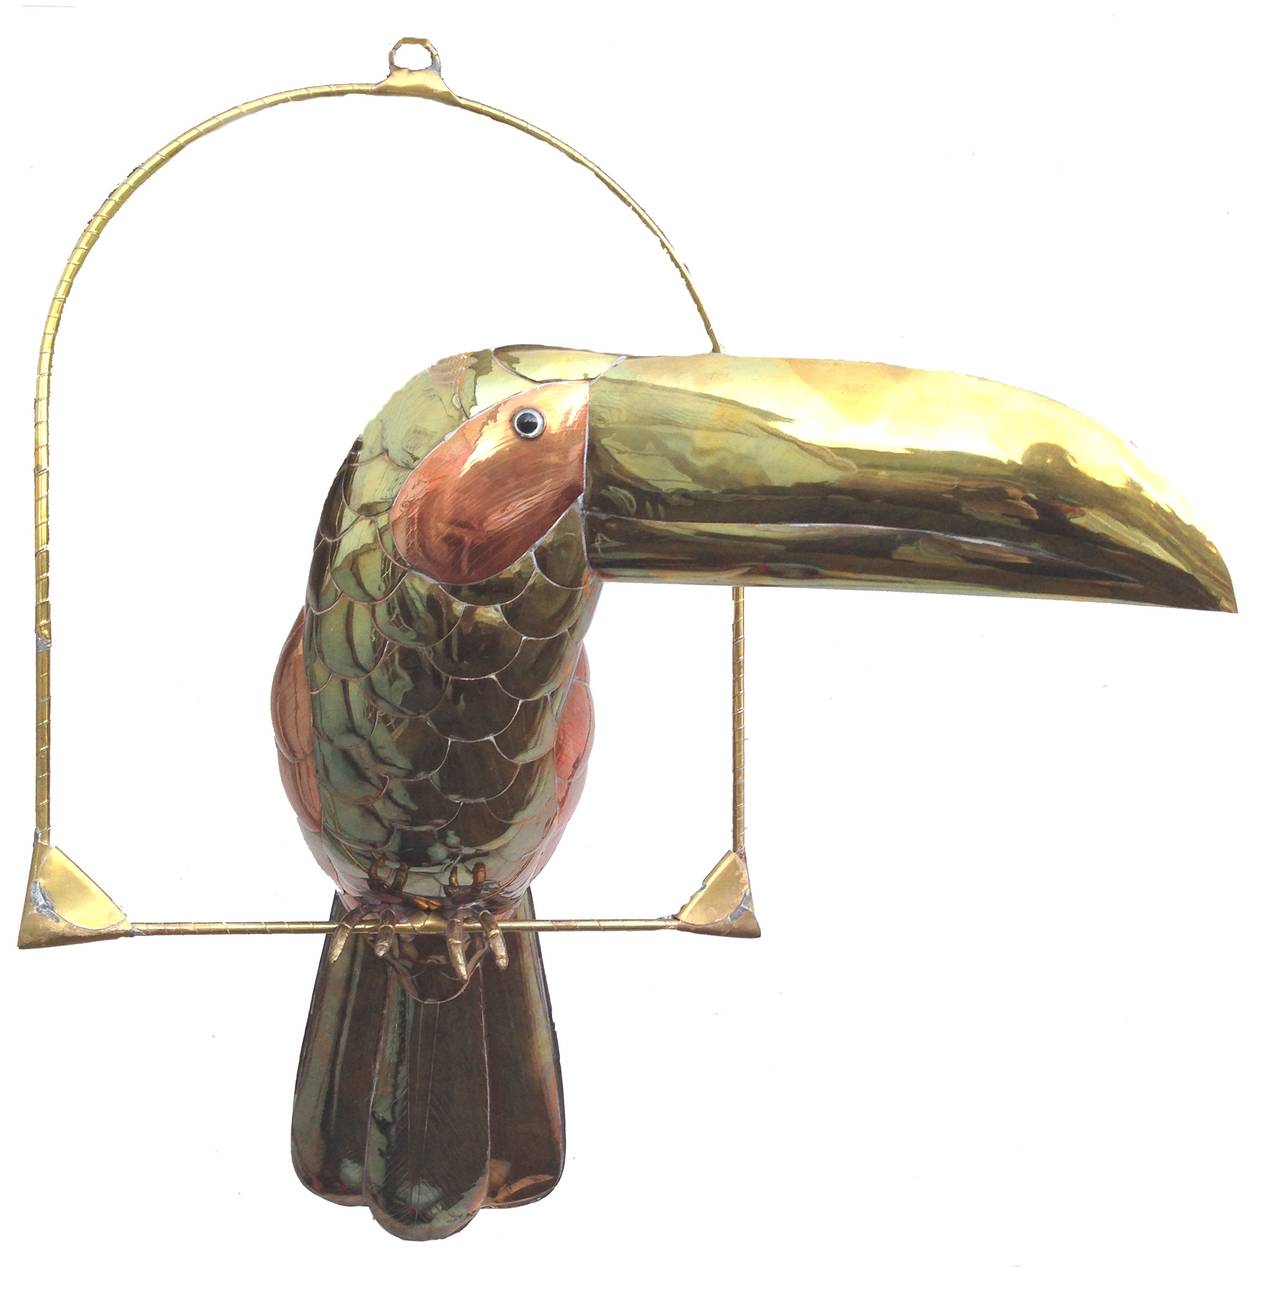 Sergio Bustamante Figurative Sculpture - Brass and Copper Toucan and Hanging Perch